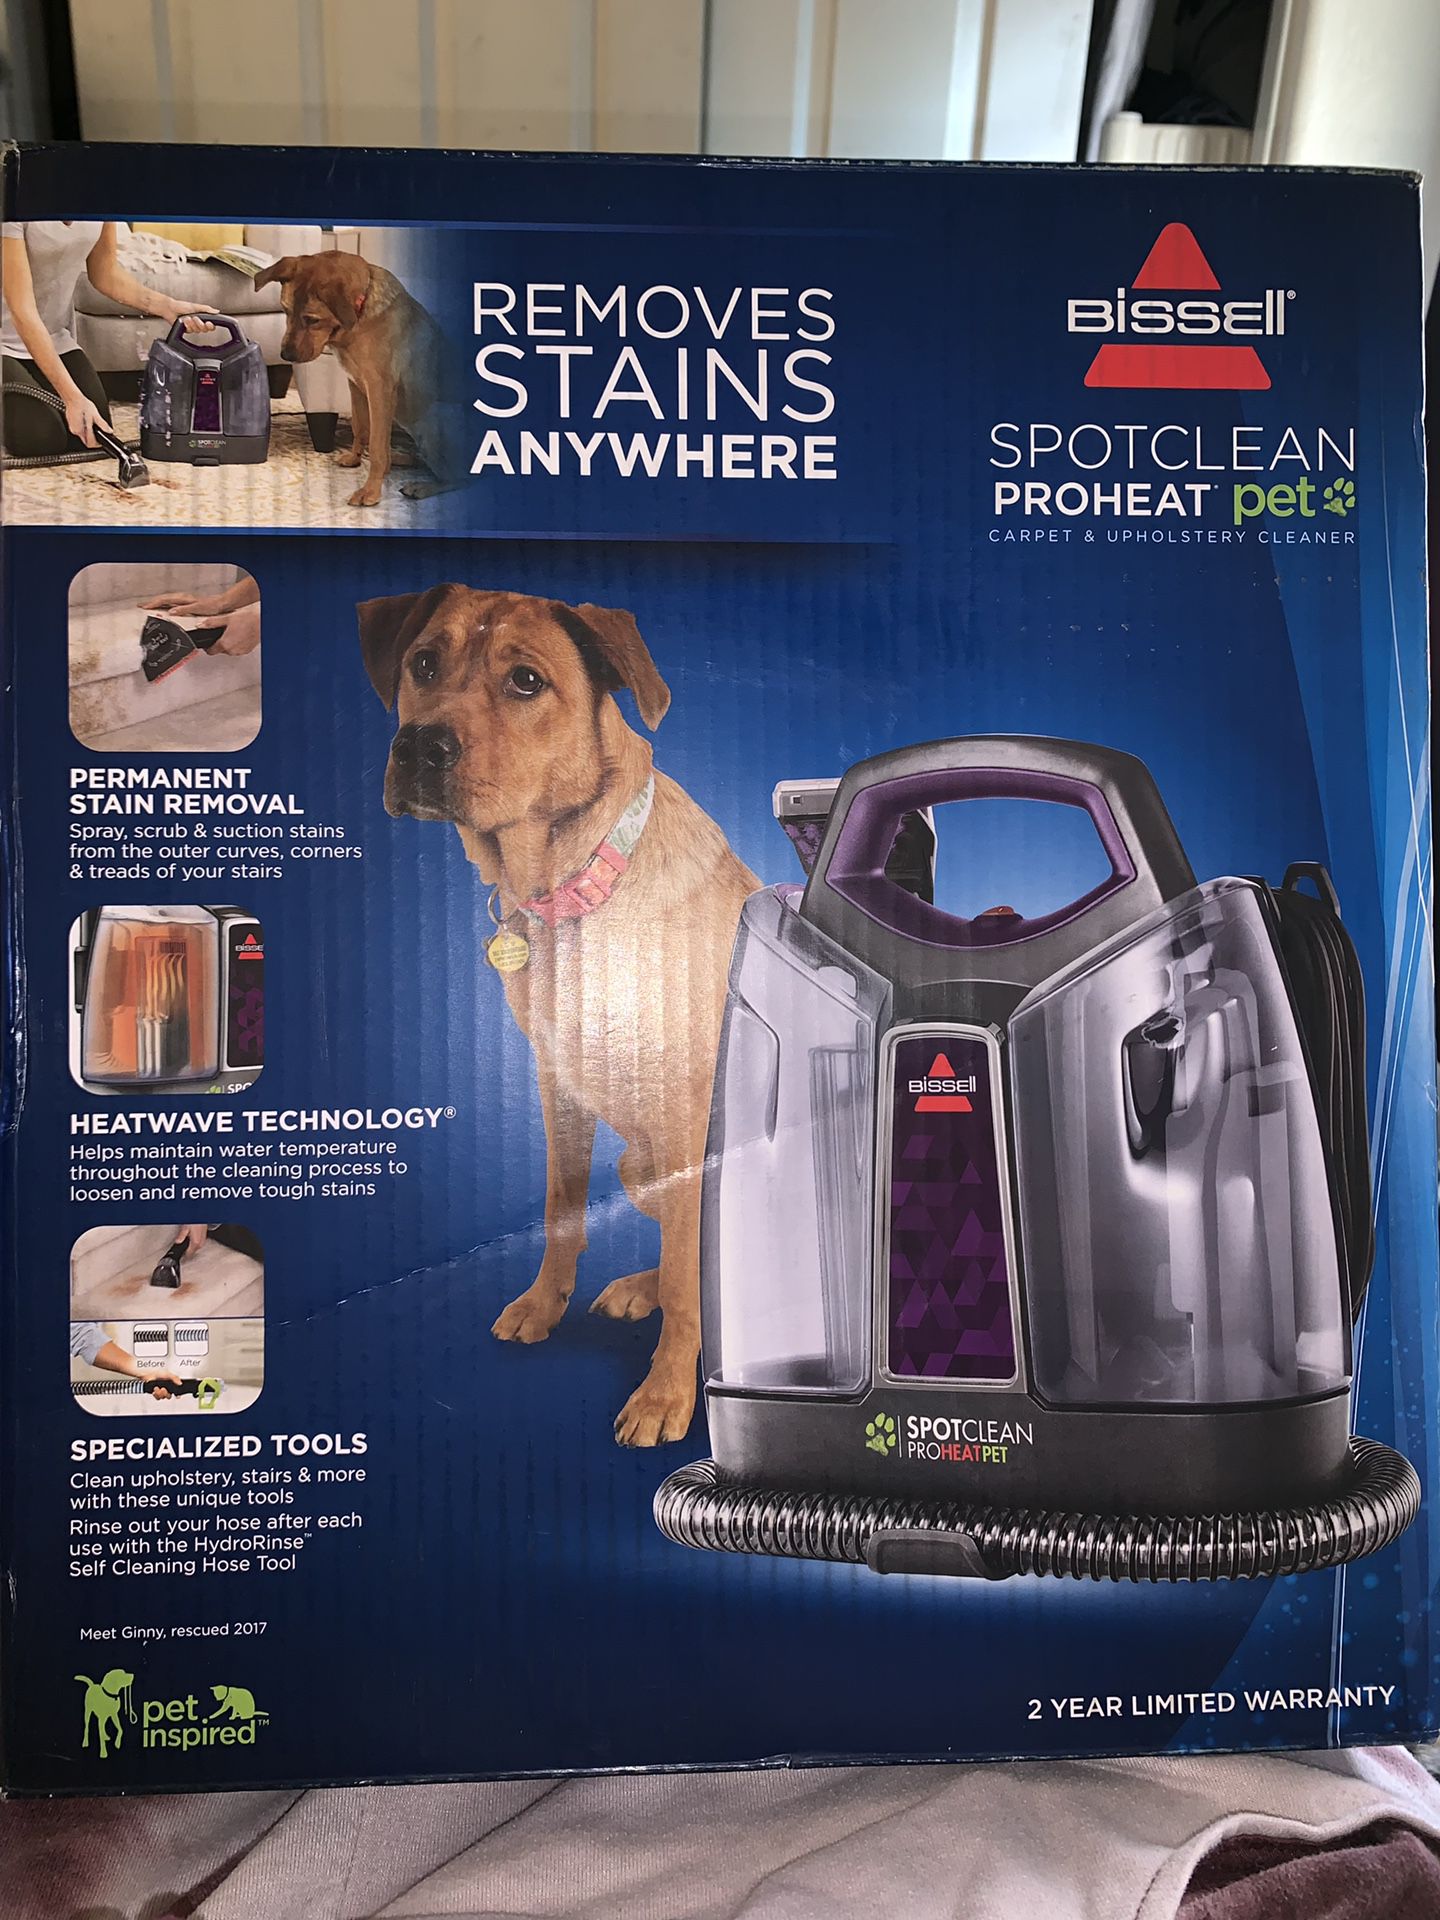 BISSEL SPOTCLEAN PROHEAT PET CARPET & UPHOLSTERY CLEANER